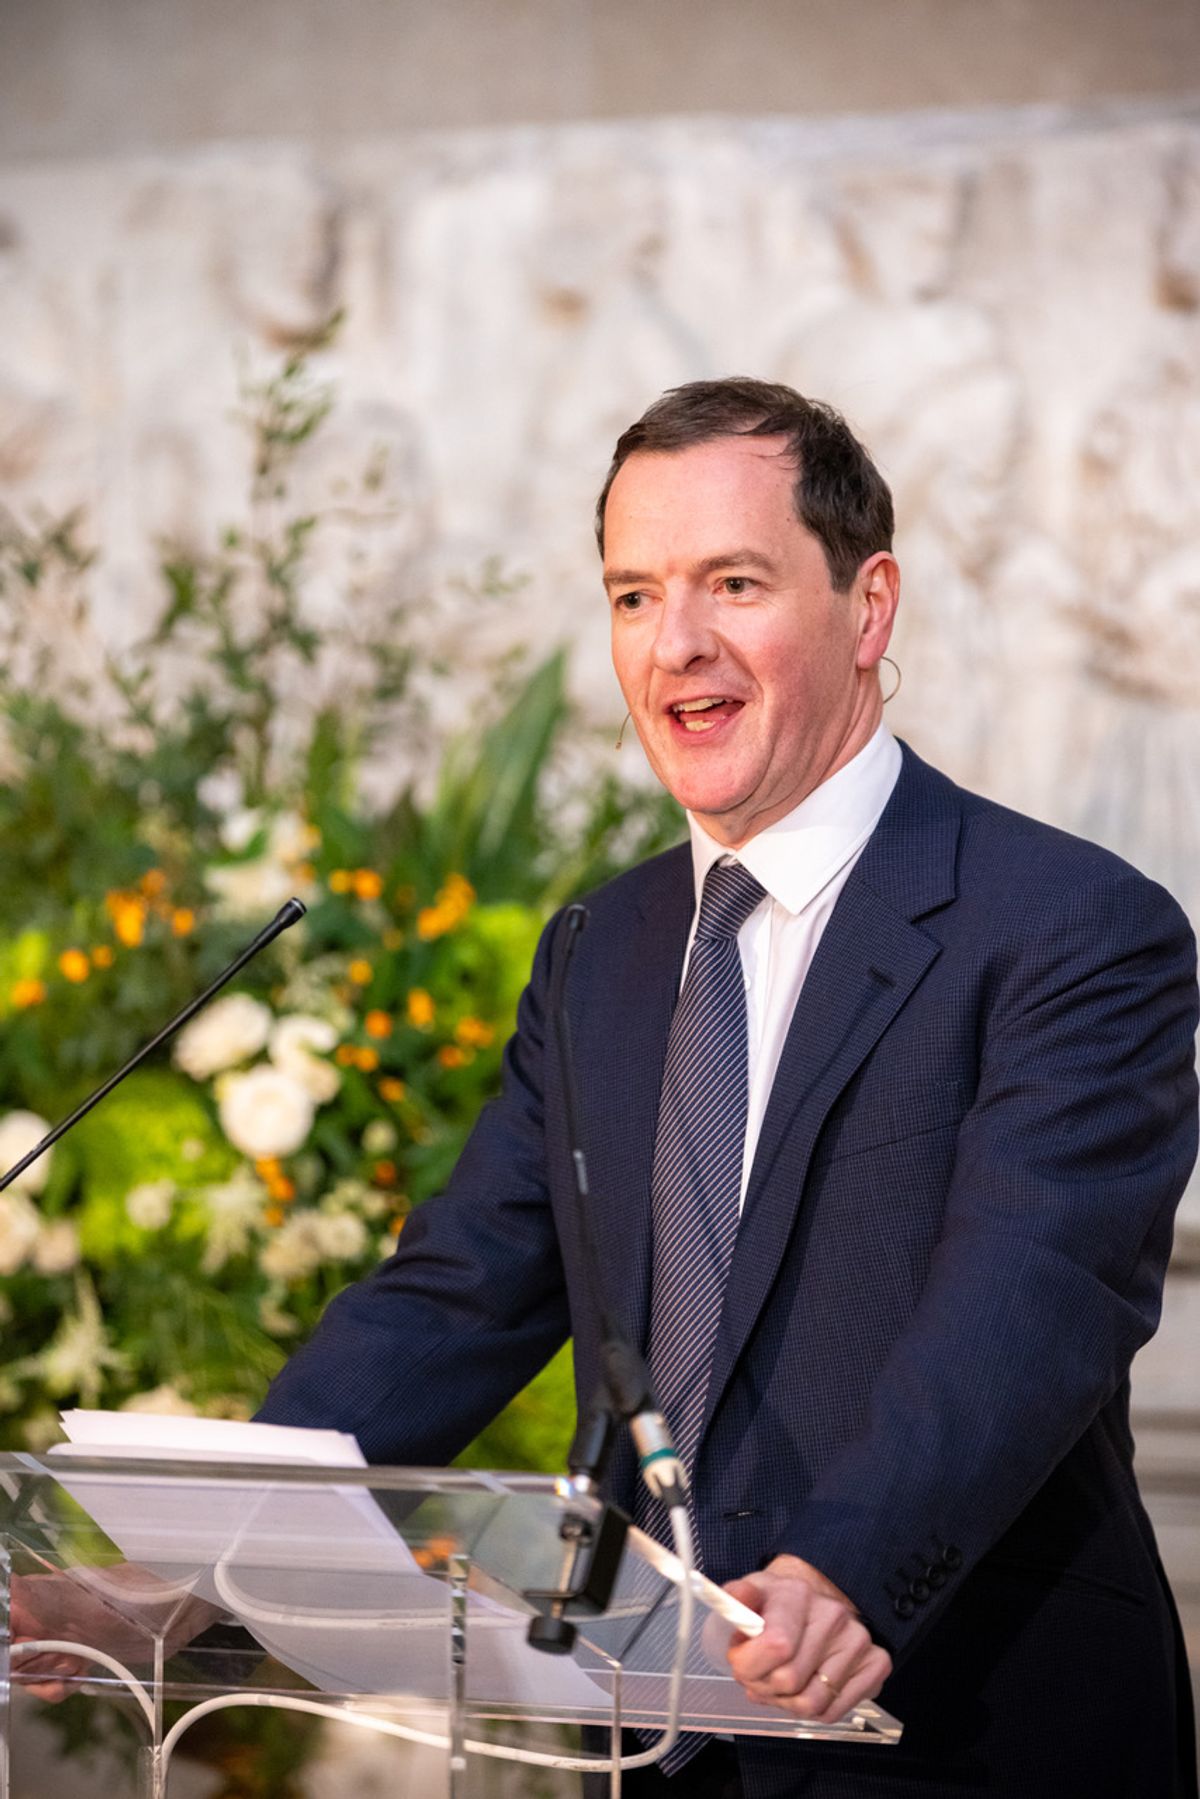 Osborne also confirmed that the findings of the independent review into the British Museum thefts will be published

Photo: @benedictjohnsonphoto